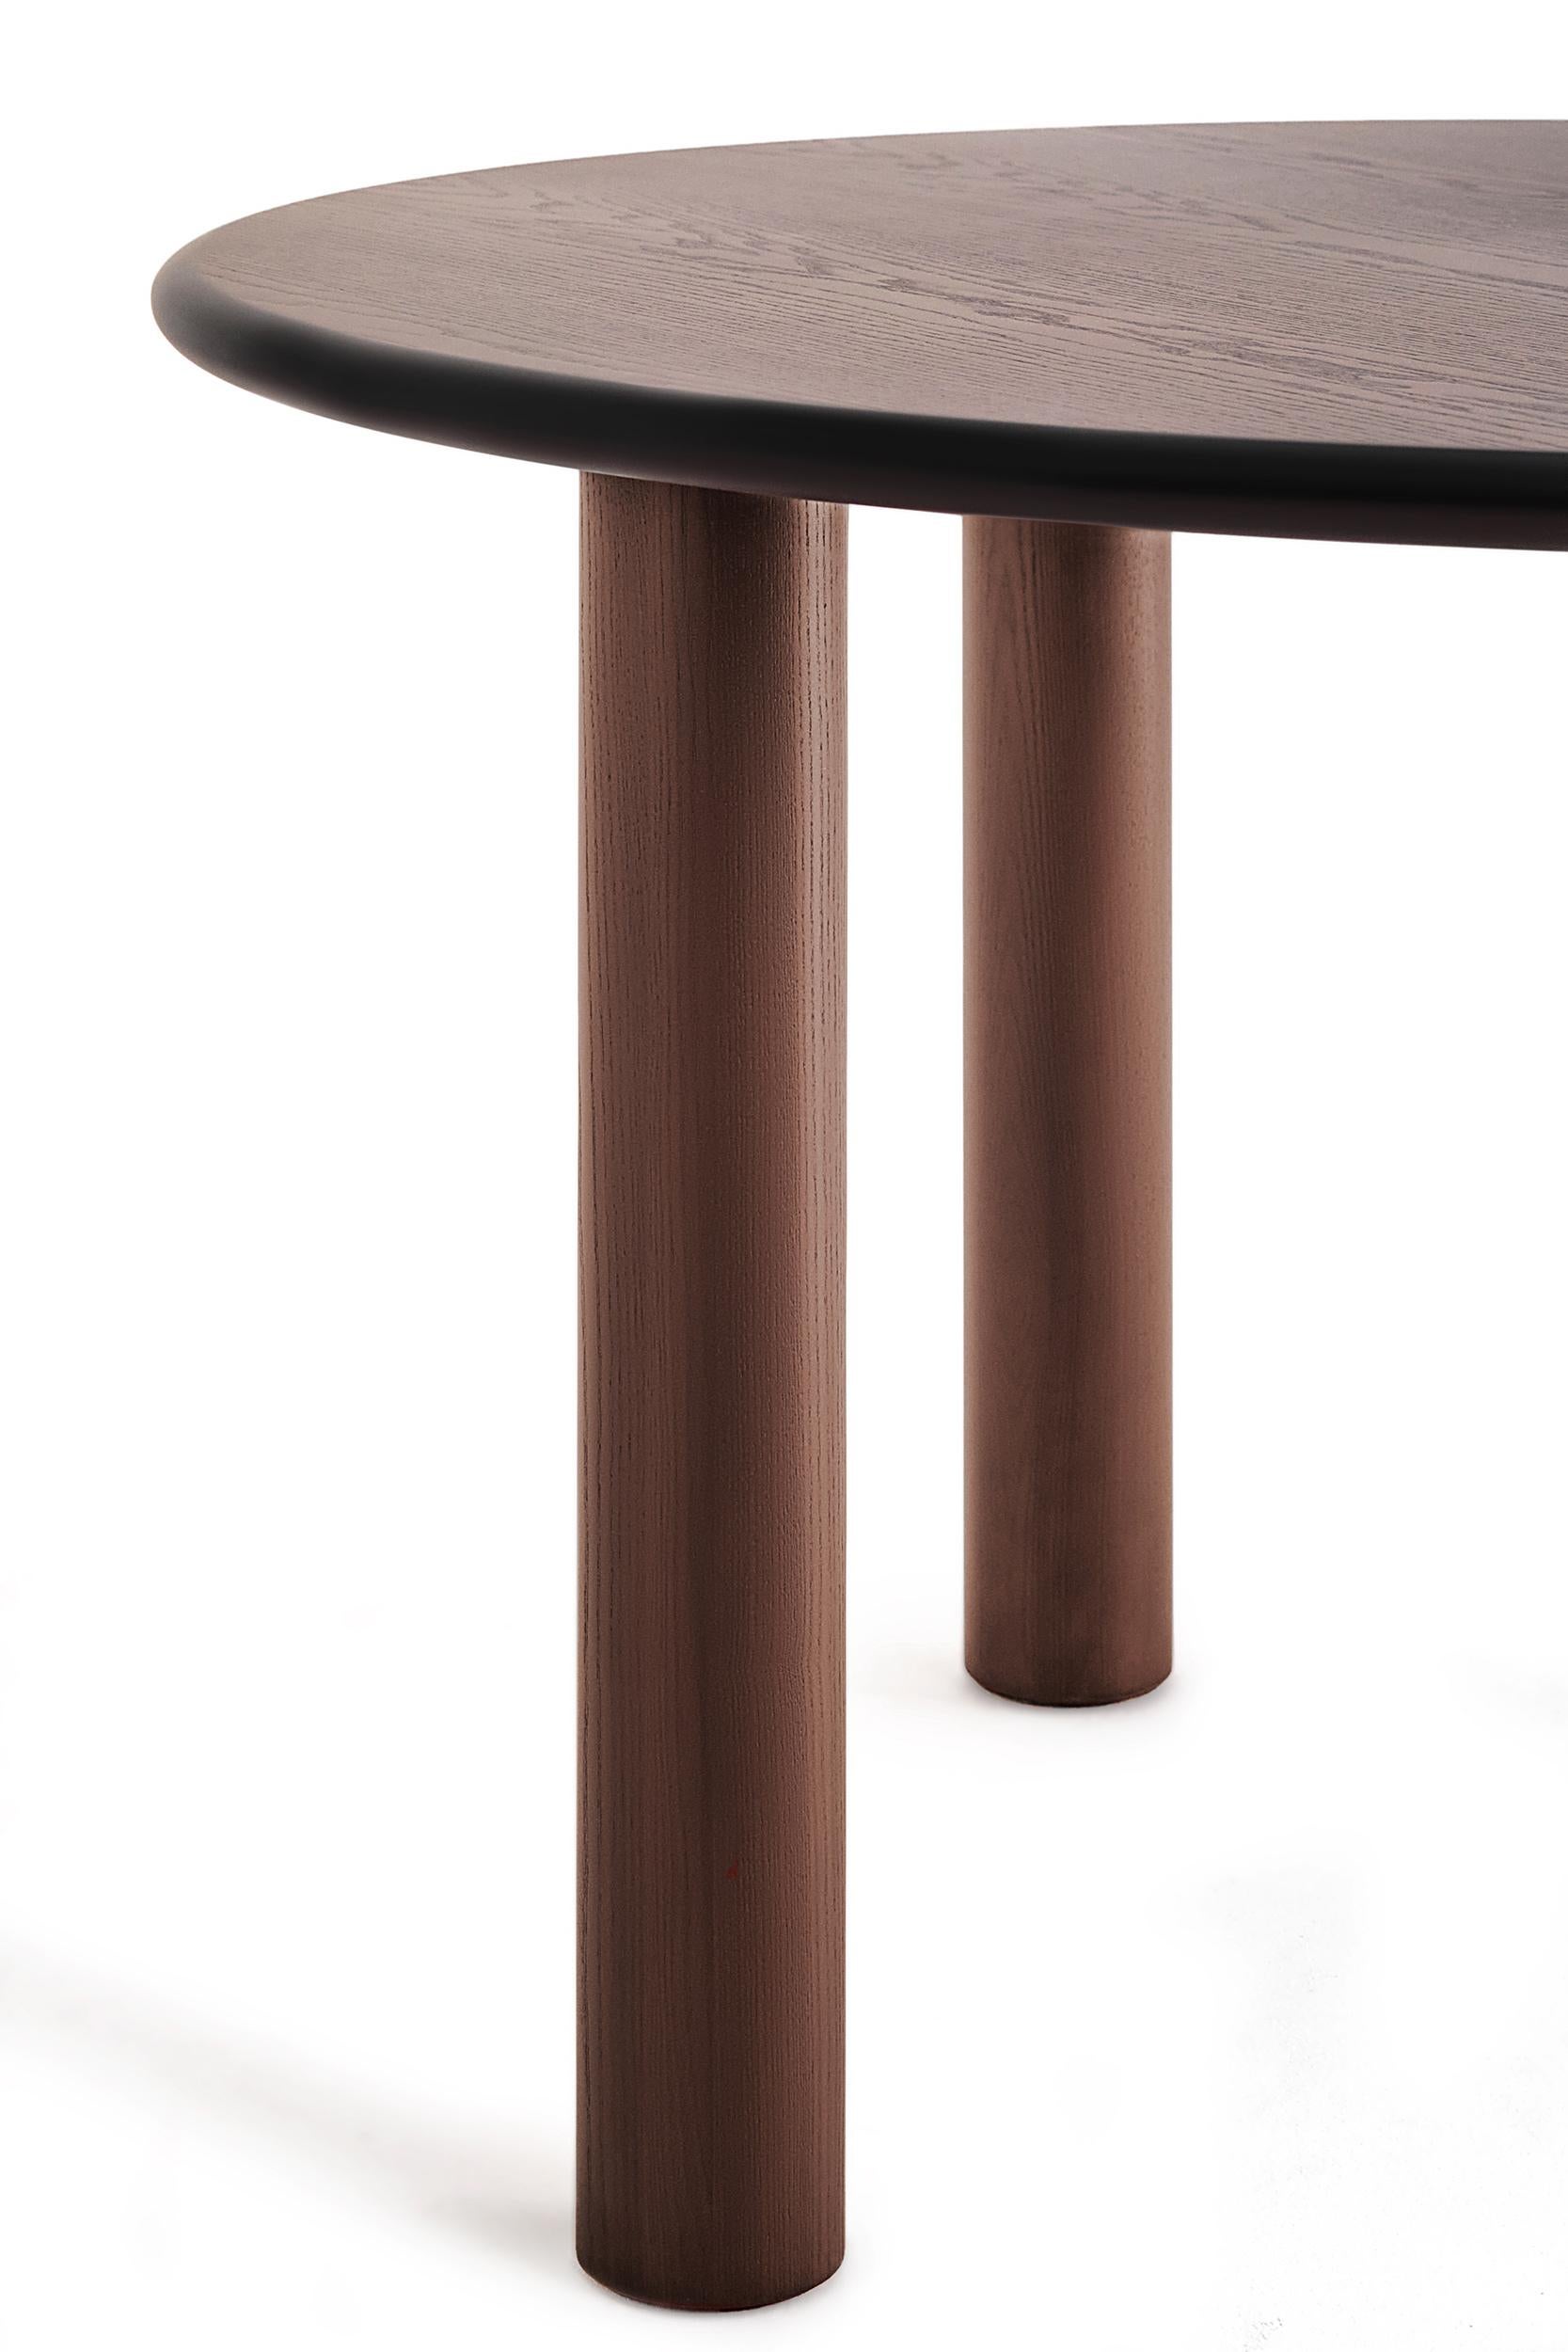 Contemporary Dining Round Table 'Paul' by Noom, Brown Stained, 130 cm In New Condition For Sale In Paris, FR